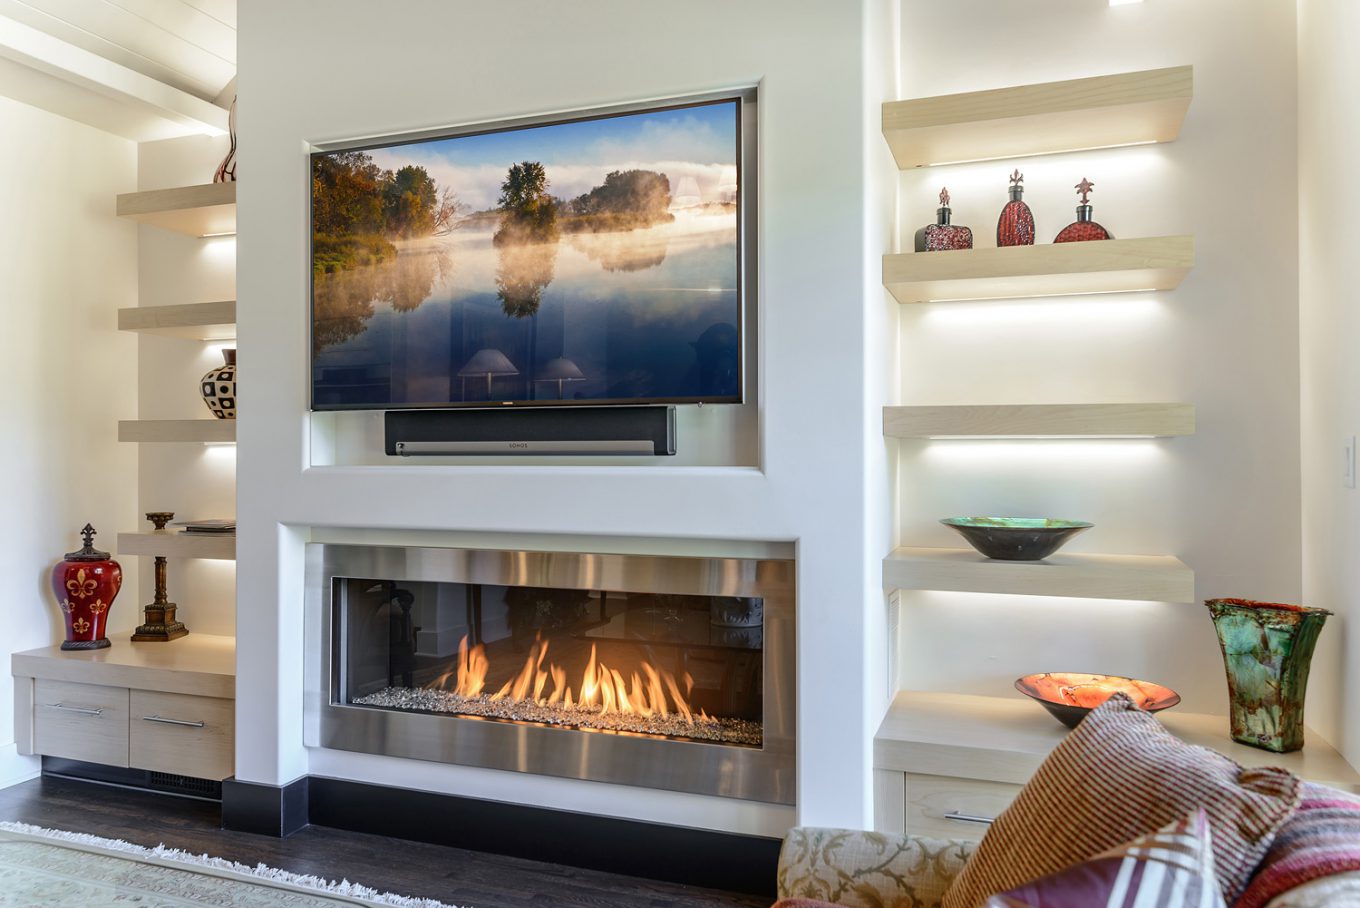 Install A Tv Over Fireplace, Built In Gas Fireplace Installation